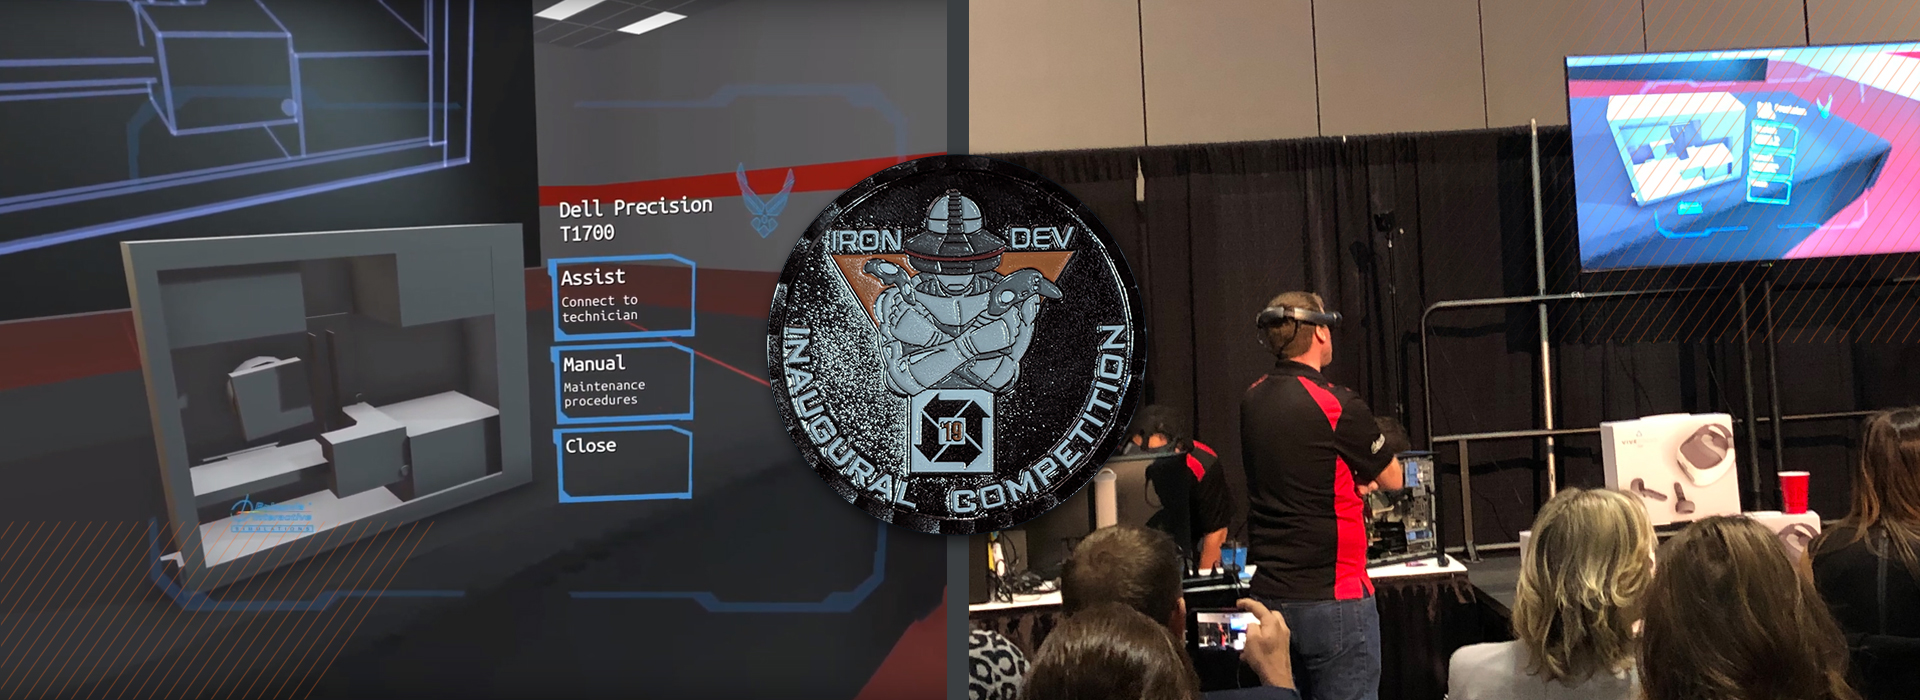 bisim_developer_team_win_peoples_choice_award_at_iitsec_2019s_inaugural_iron_dev_competition